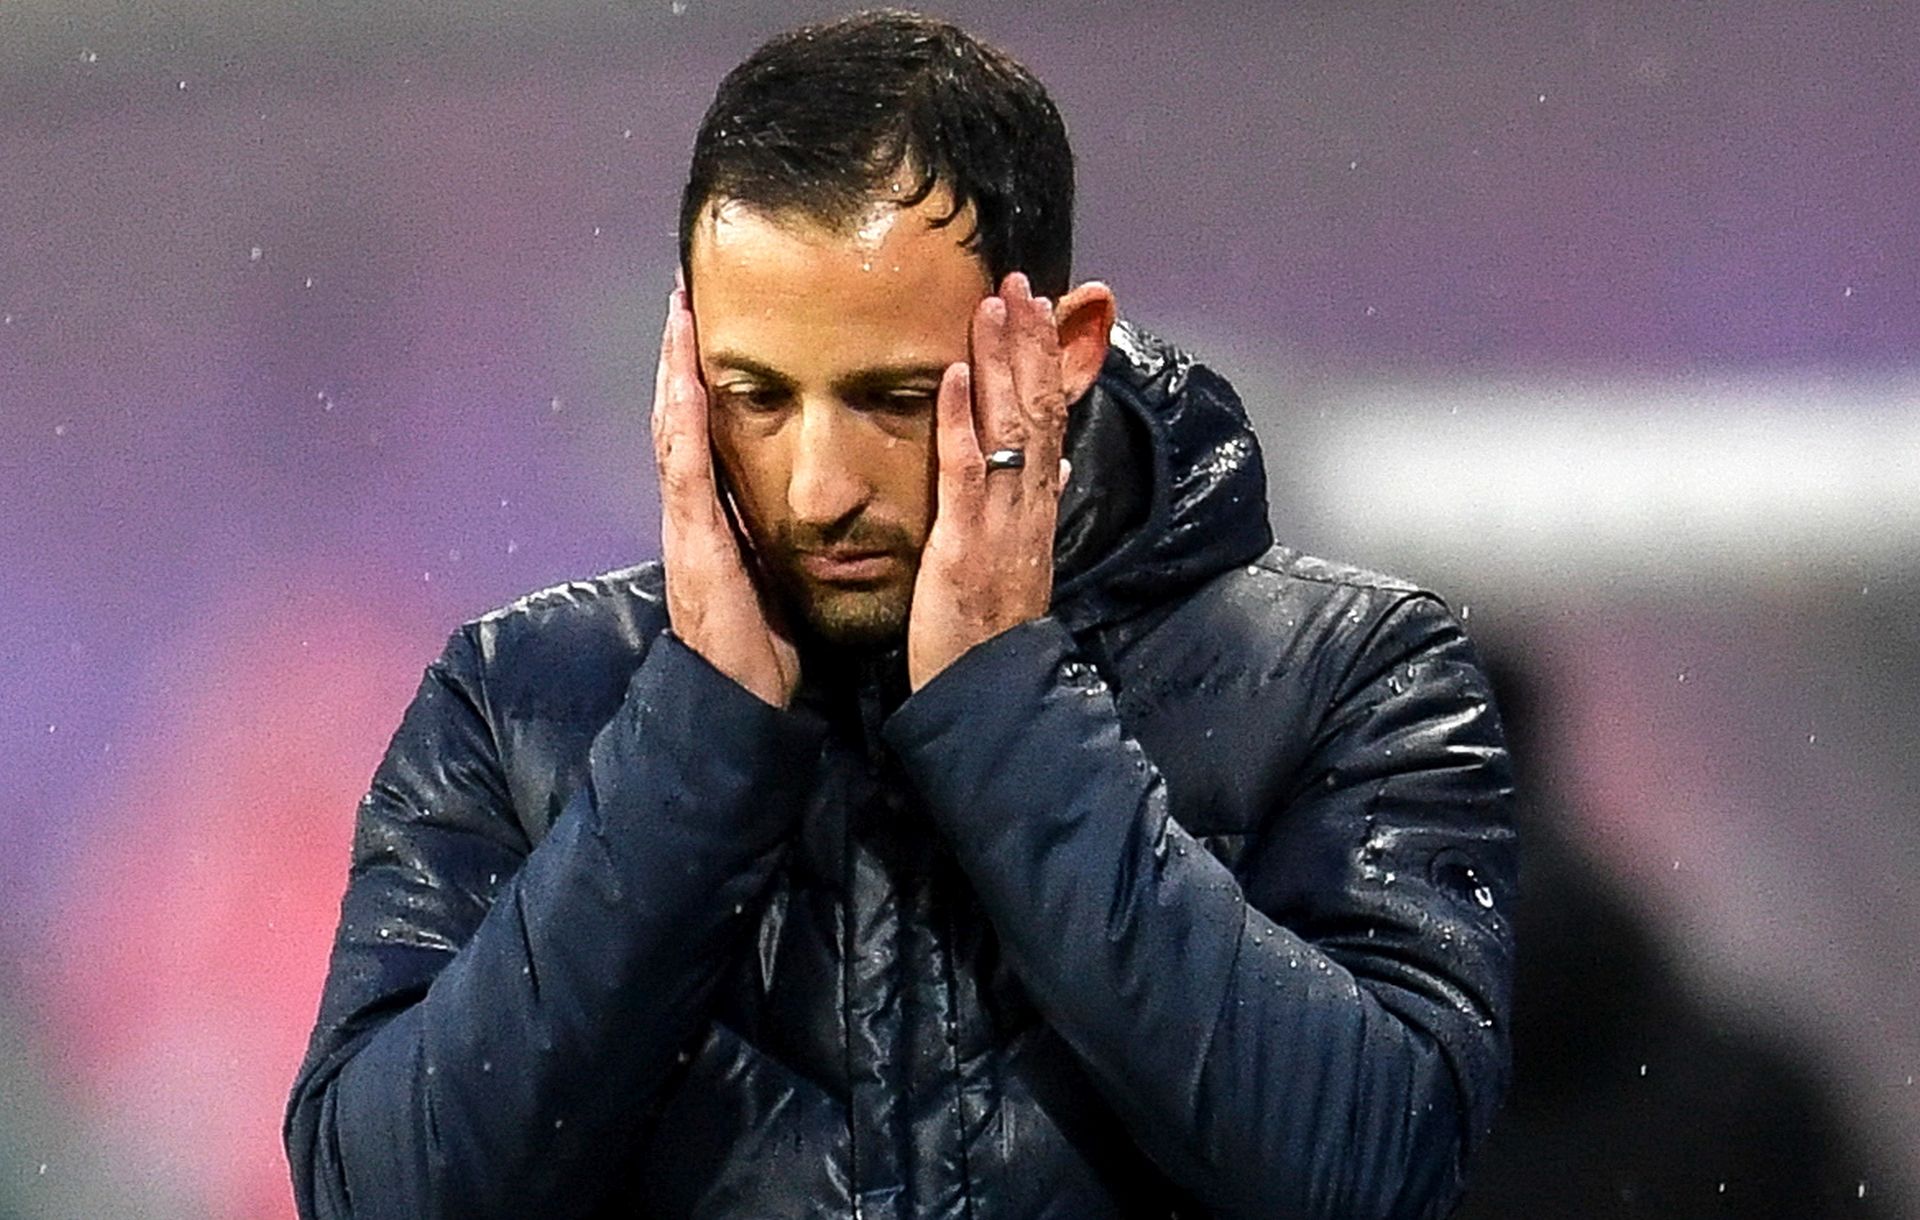 epa07437156 (FILE) - Schalke's head coach Domenico Tedesco reacts during the German Bundesliga soccer match between RB Leipzig and FC Schalke 04 in Leipzig, Germany, 28 October 2018. Schalke sacked Tedesco on 14 March according to media reports.  EPA/FILIP SINGER CONDITIONS - ATTENTION:  The DFL regulations prohibit any use of photographs as image sequences and/or quasi-video.